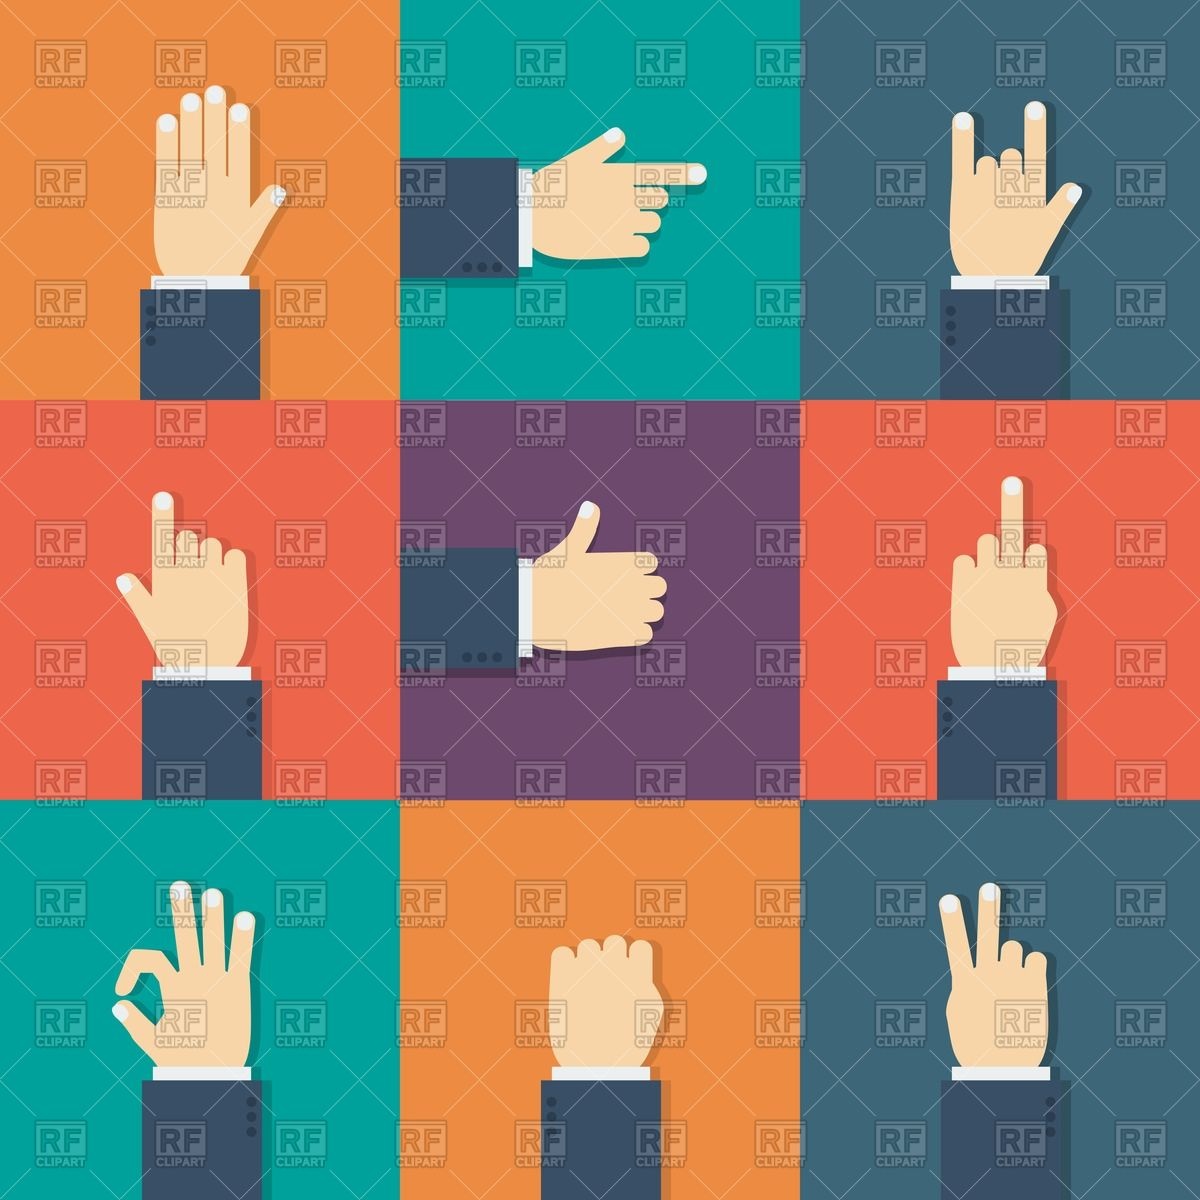 Flat Icons With Hand Gestures Signs Symbols Maps Download Royalty    